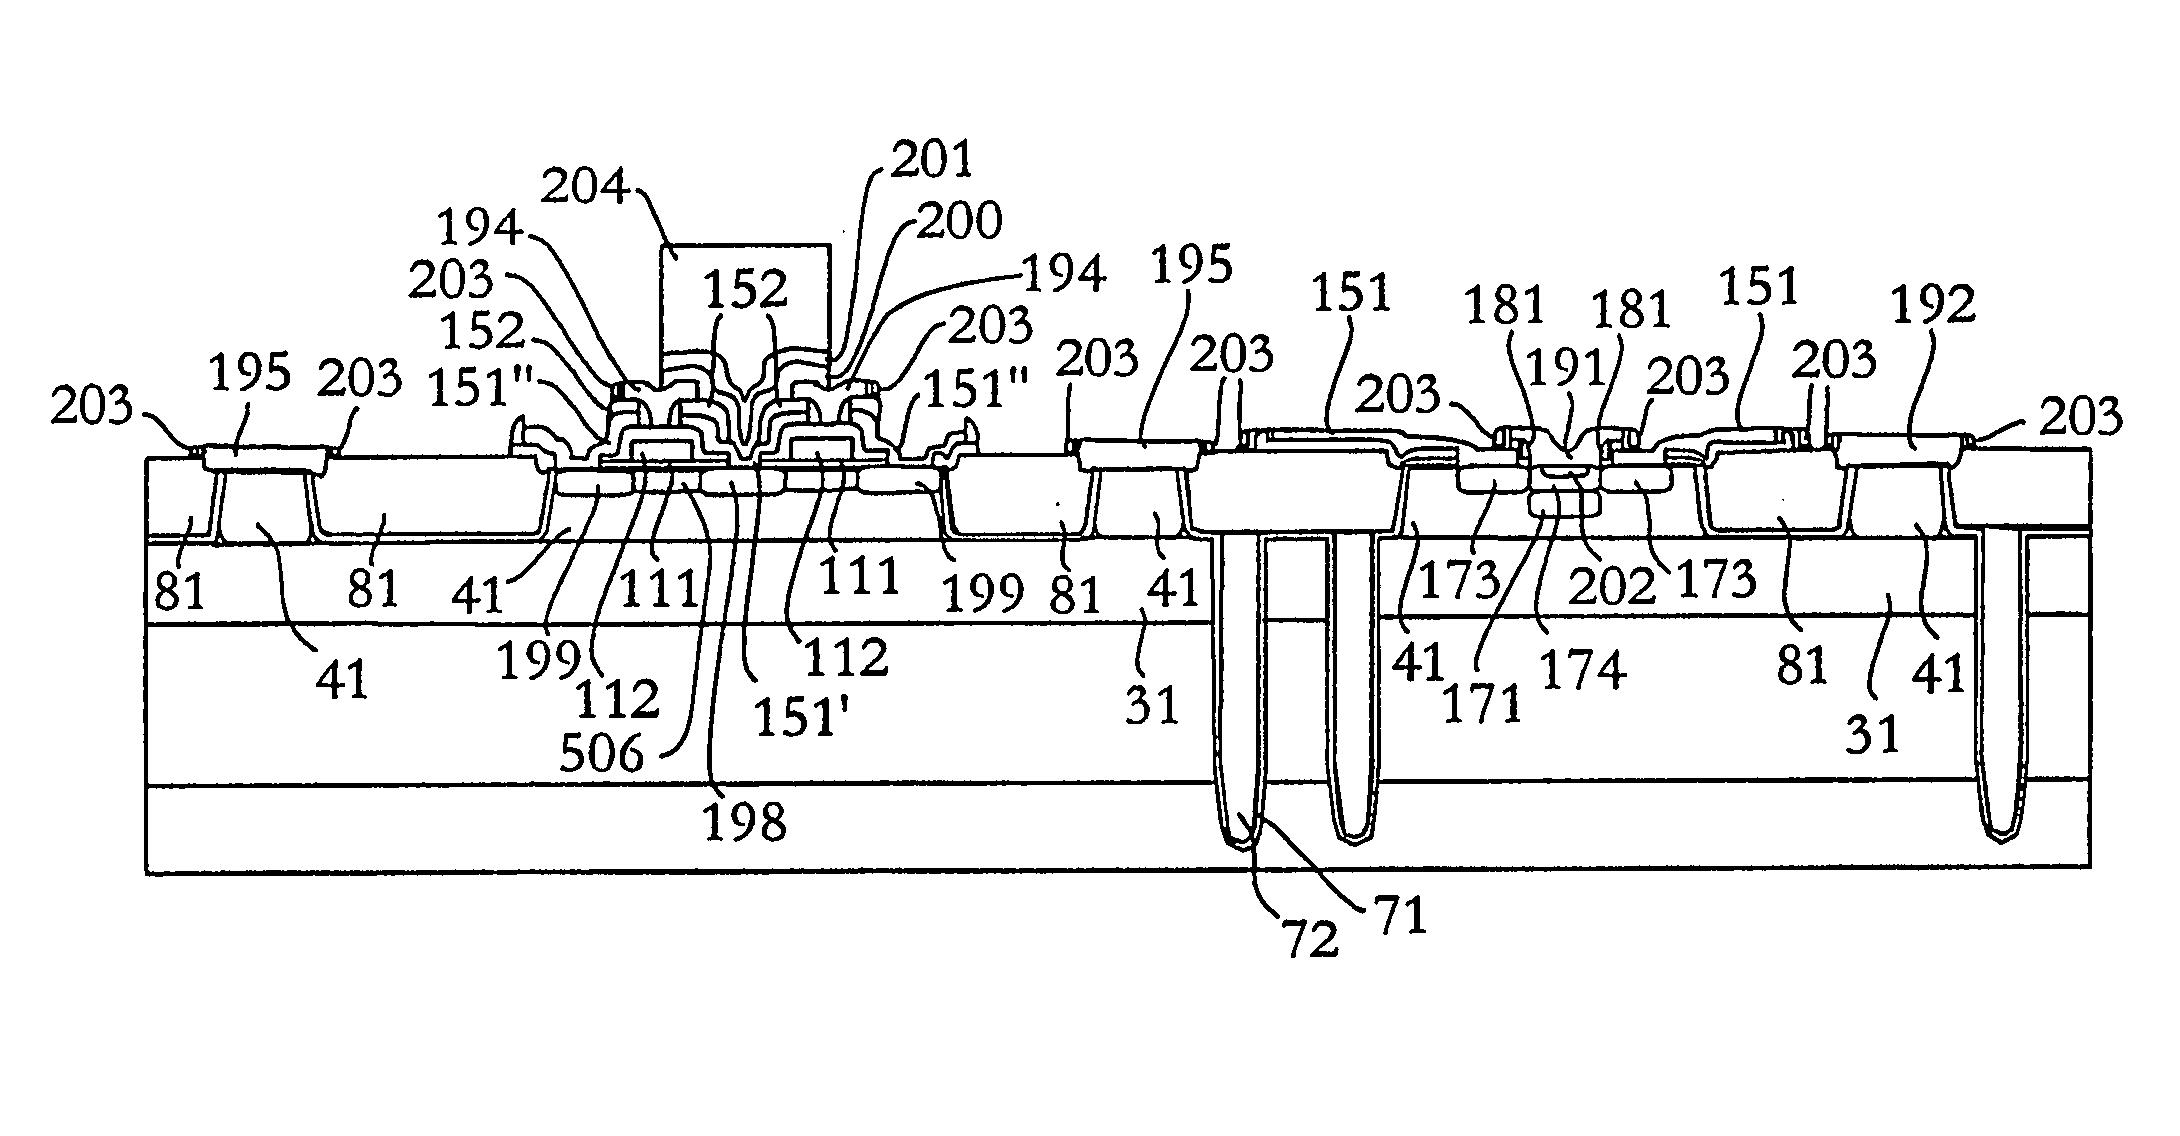 Semiconductor fabrication process, lateral PNP transistor, and integrated circuit